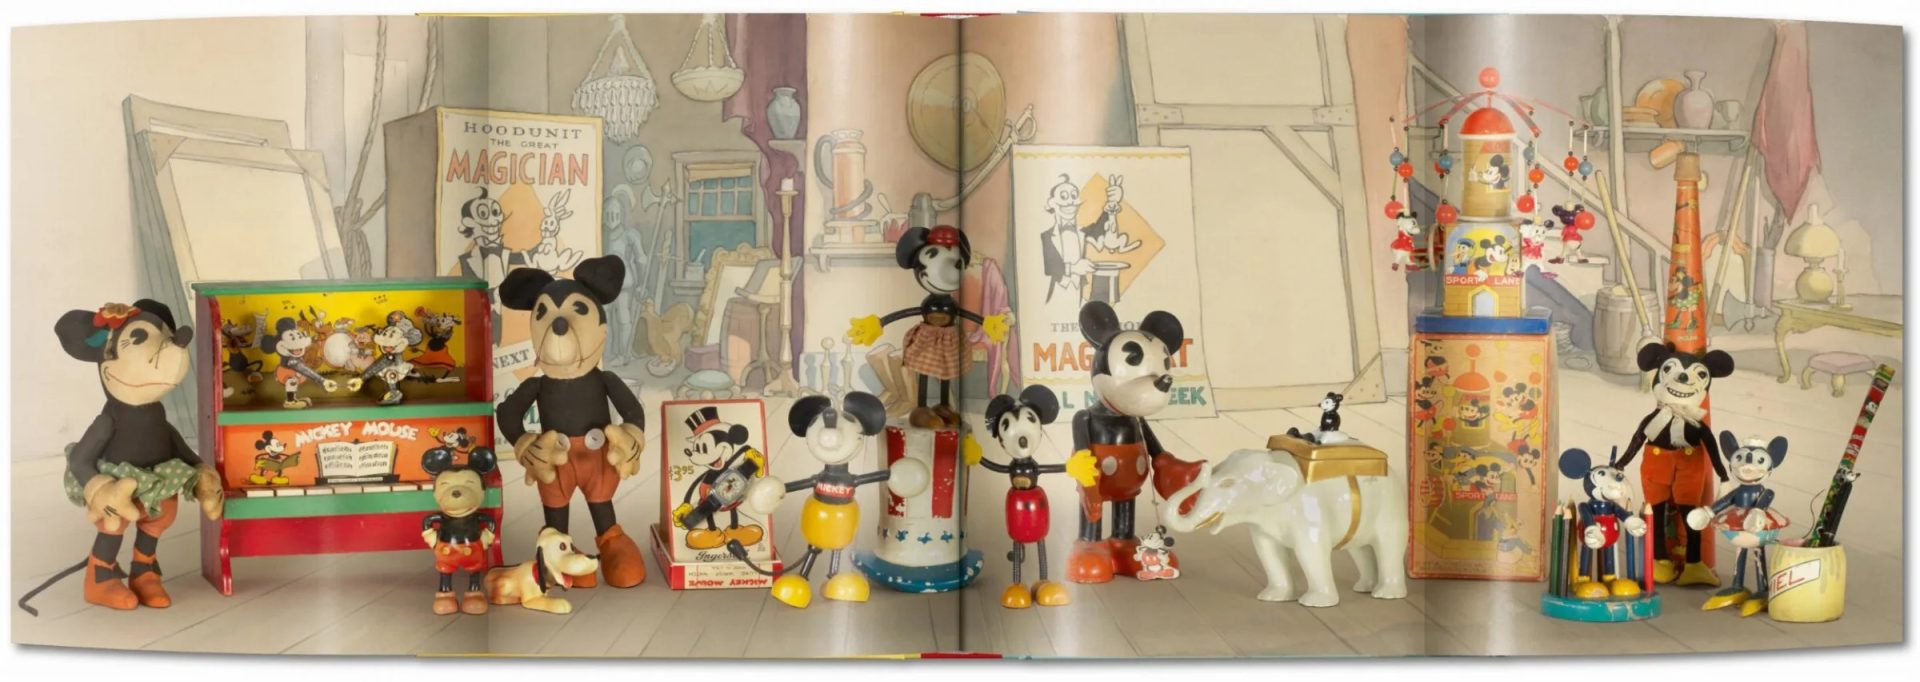 TASCHEN Books: Walt Disney's Mickey Mouse. The Ultimate History